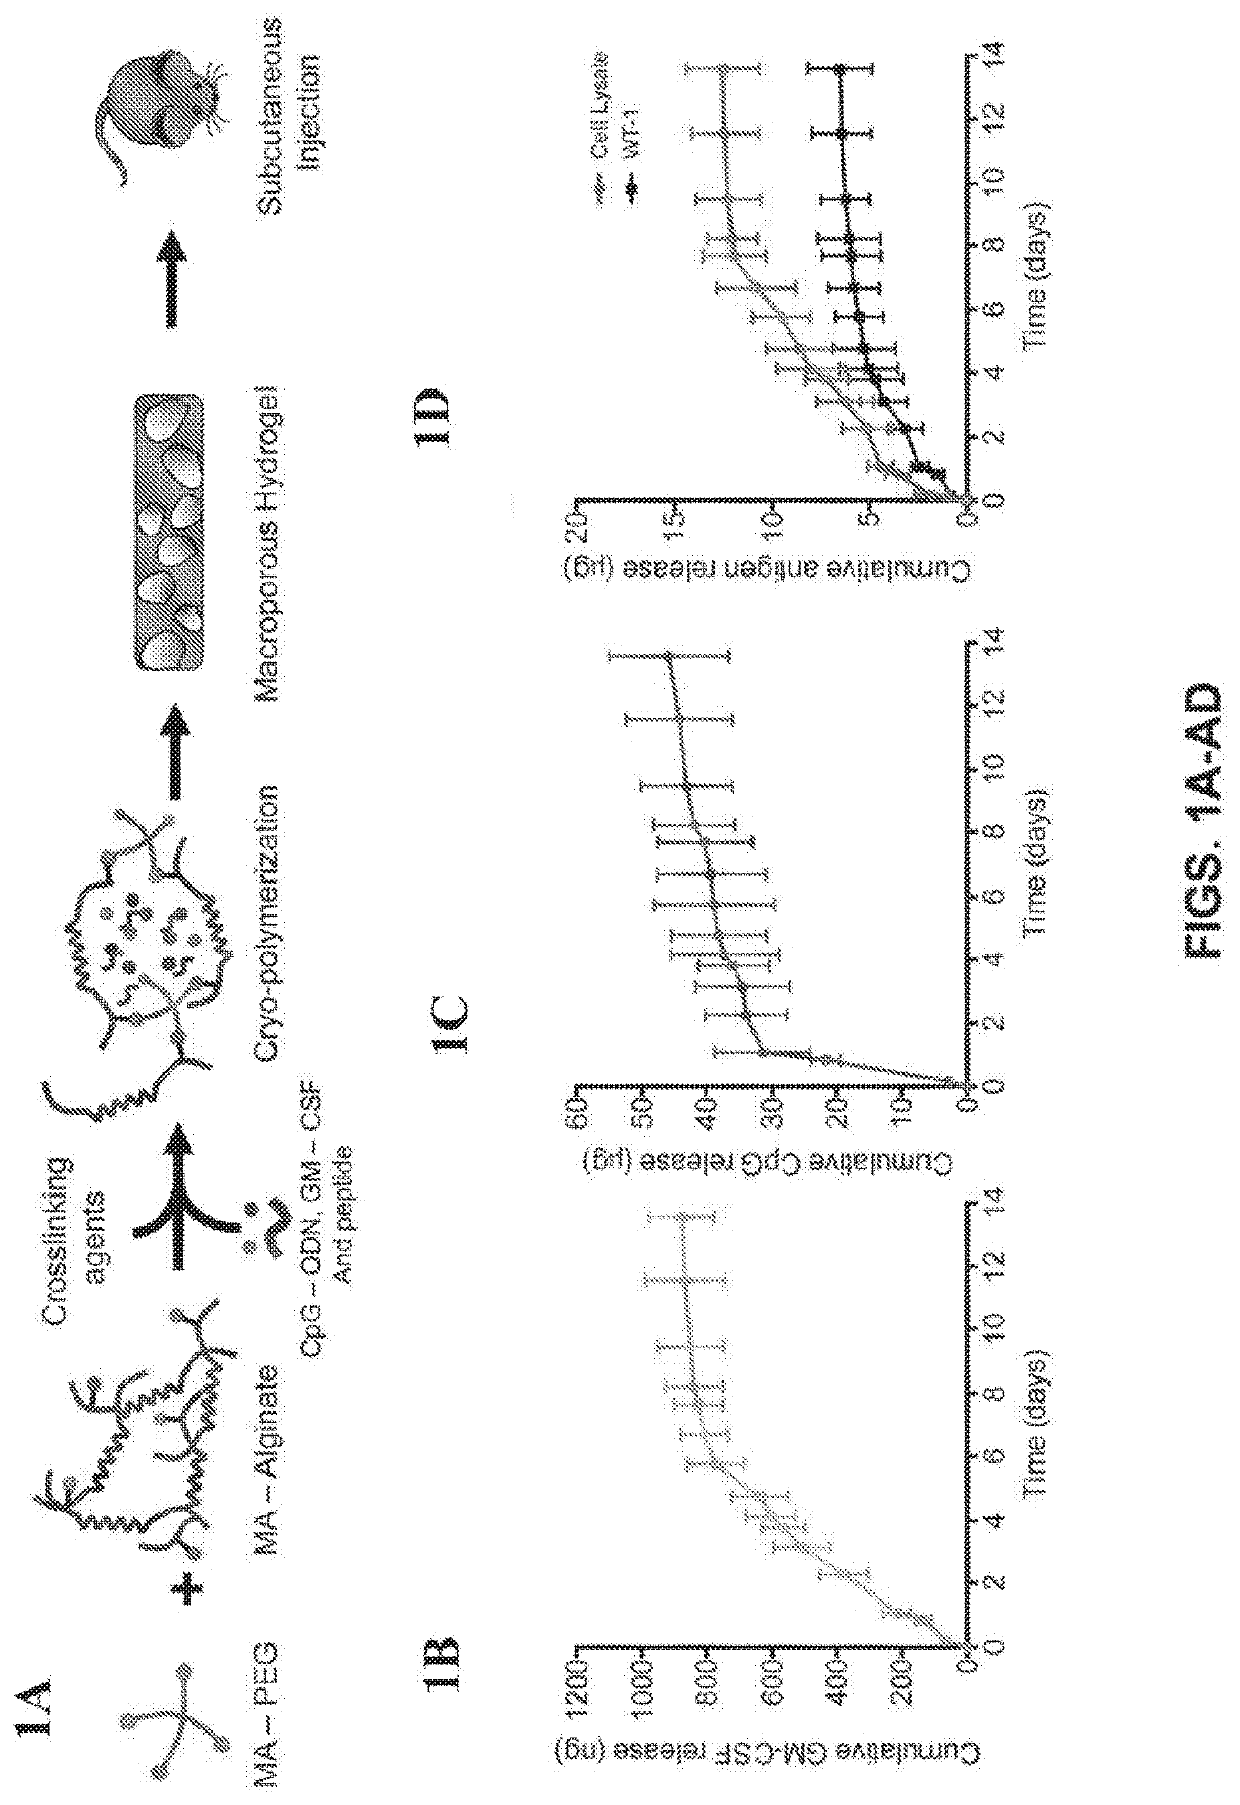 Compositions for inducing an immune response